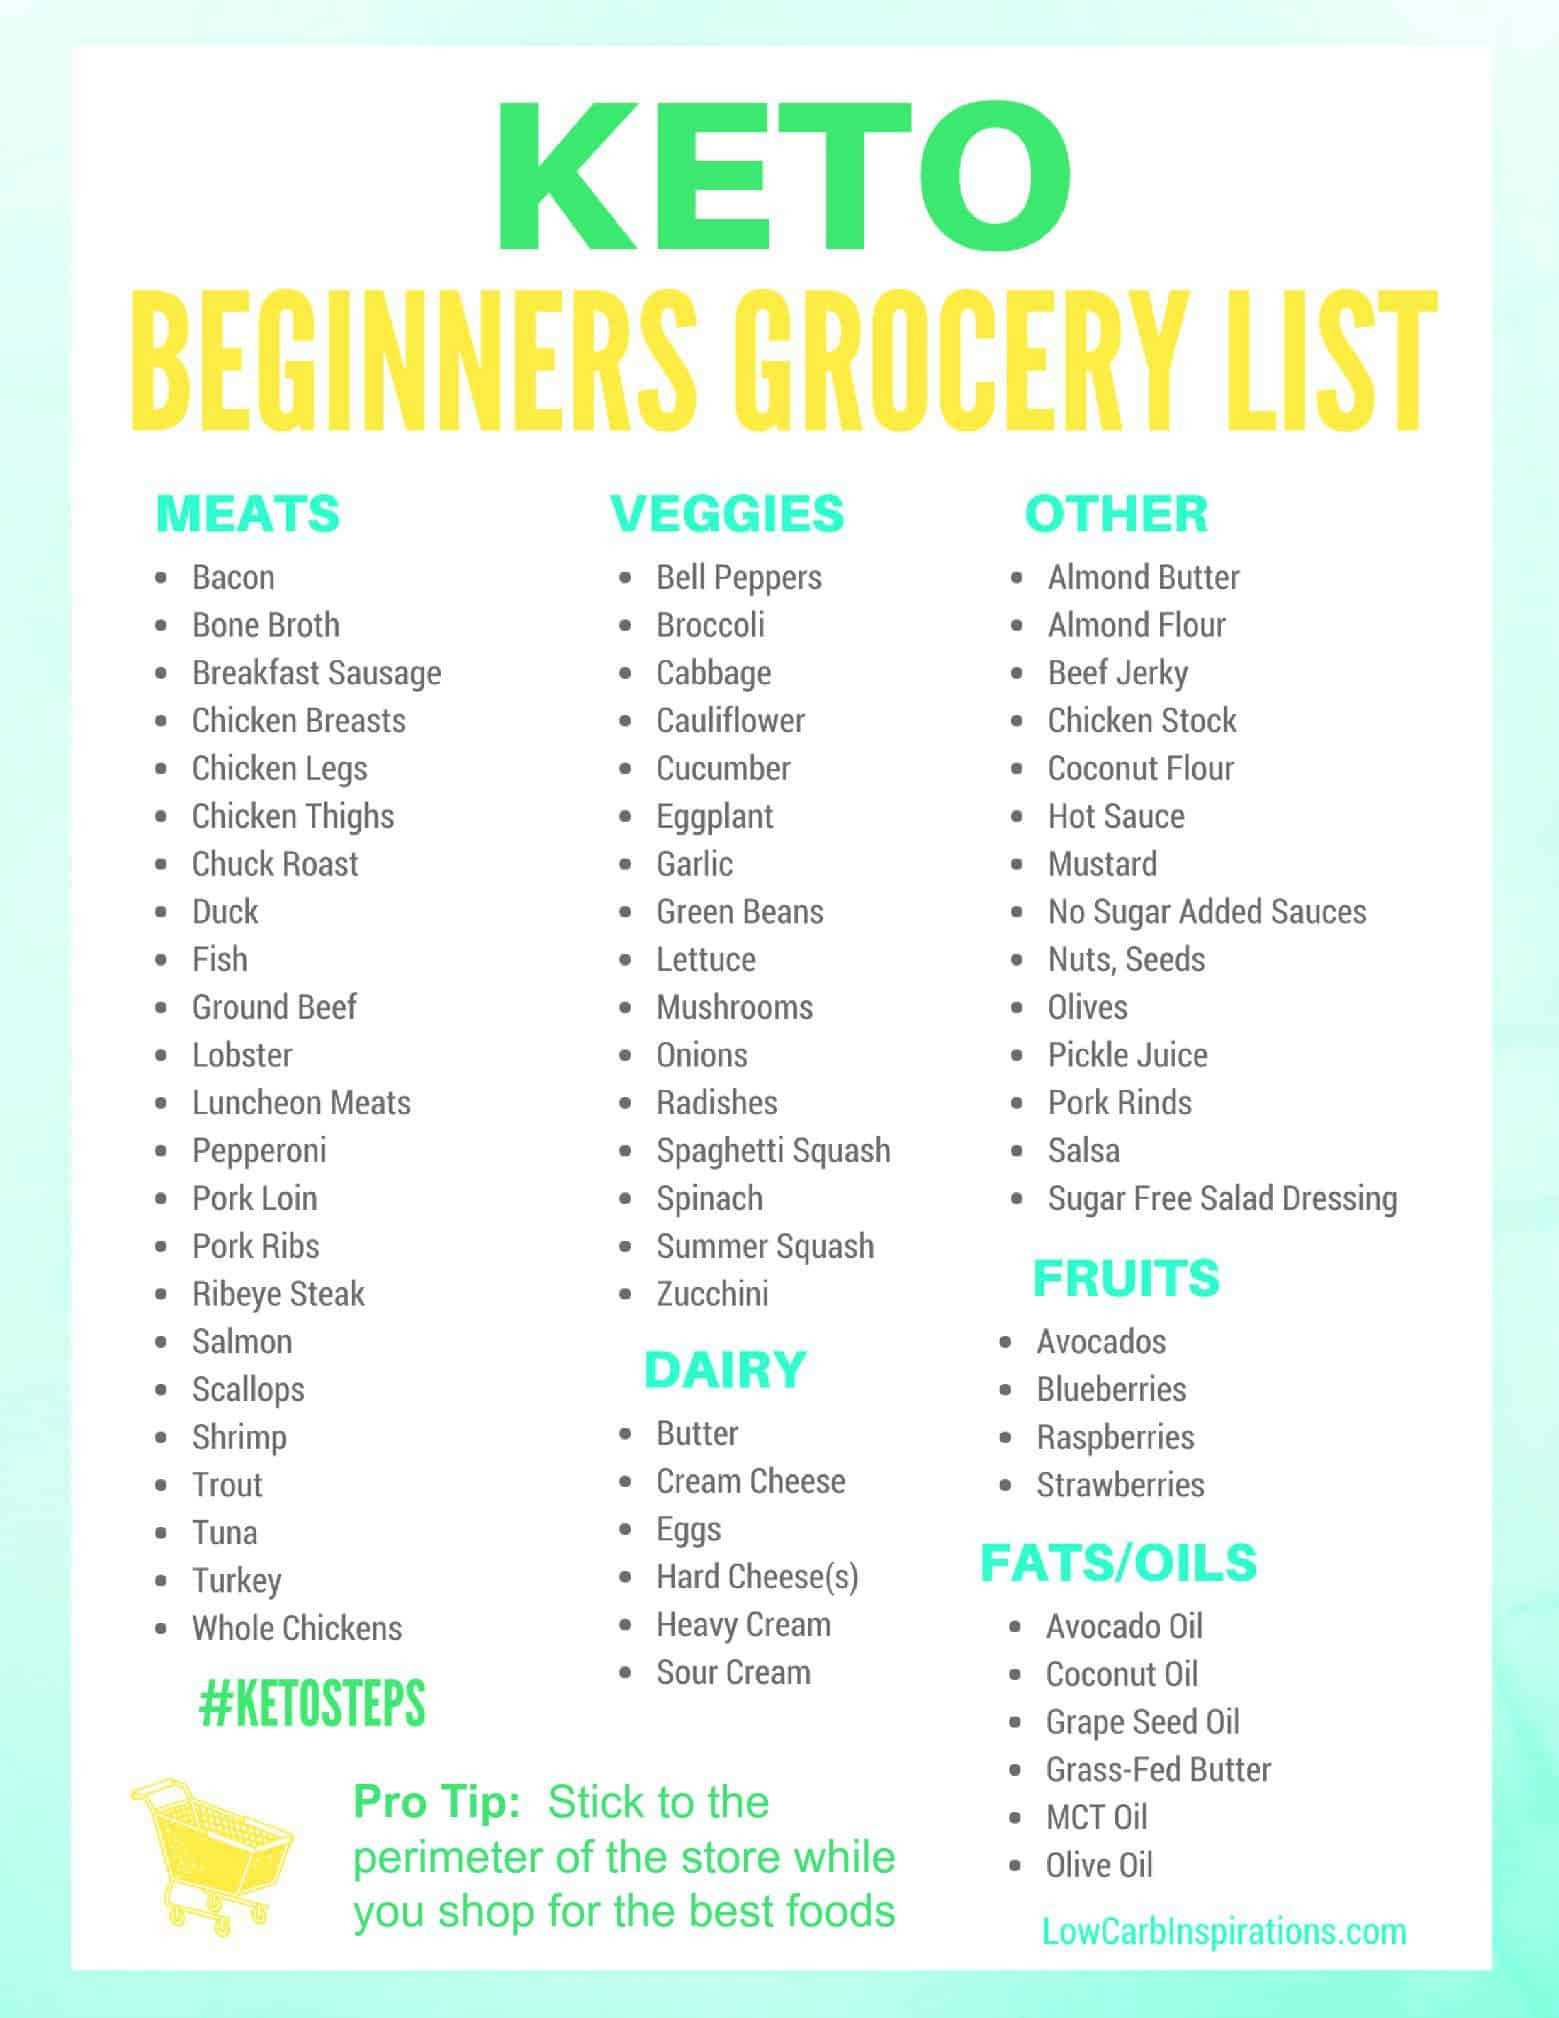 Keto Diet Grocery List And Meal Plan
 Keto Grocery List for Beginners iSaveA2Z